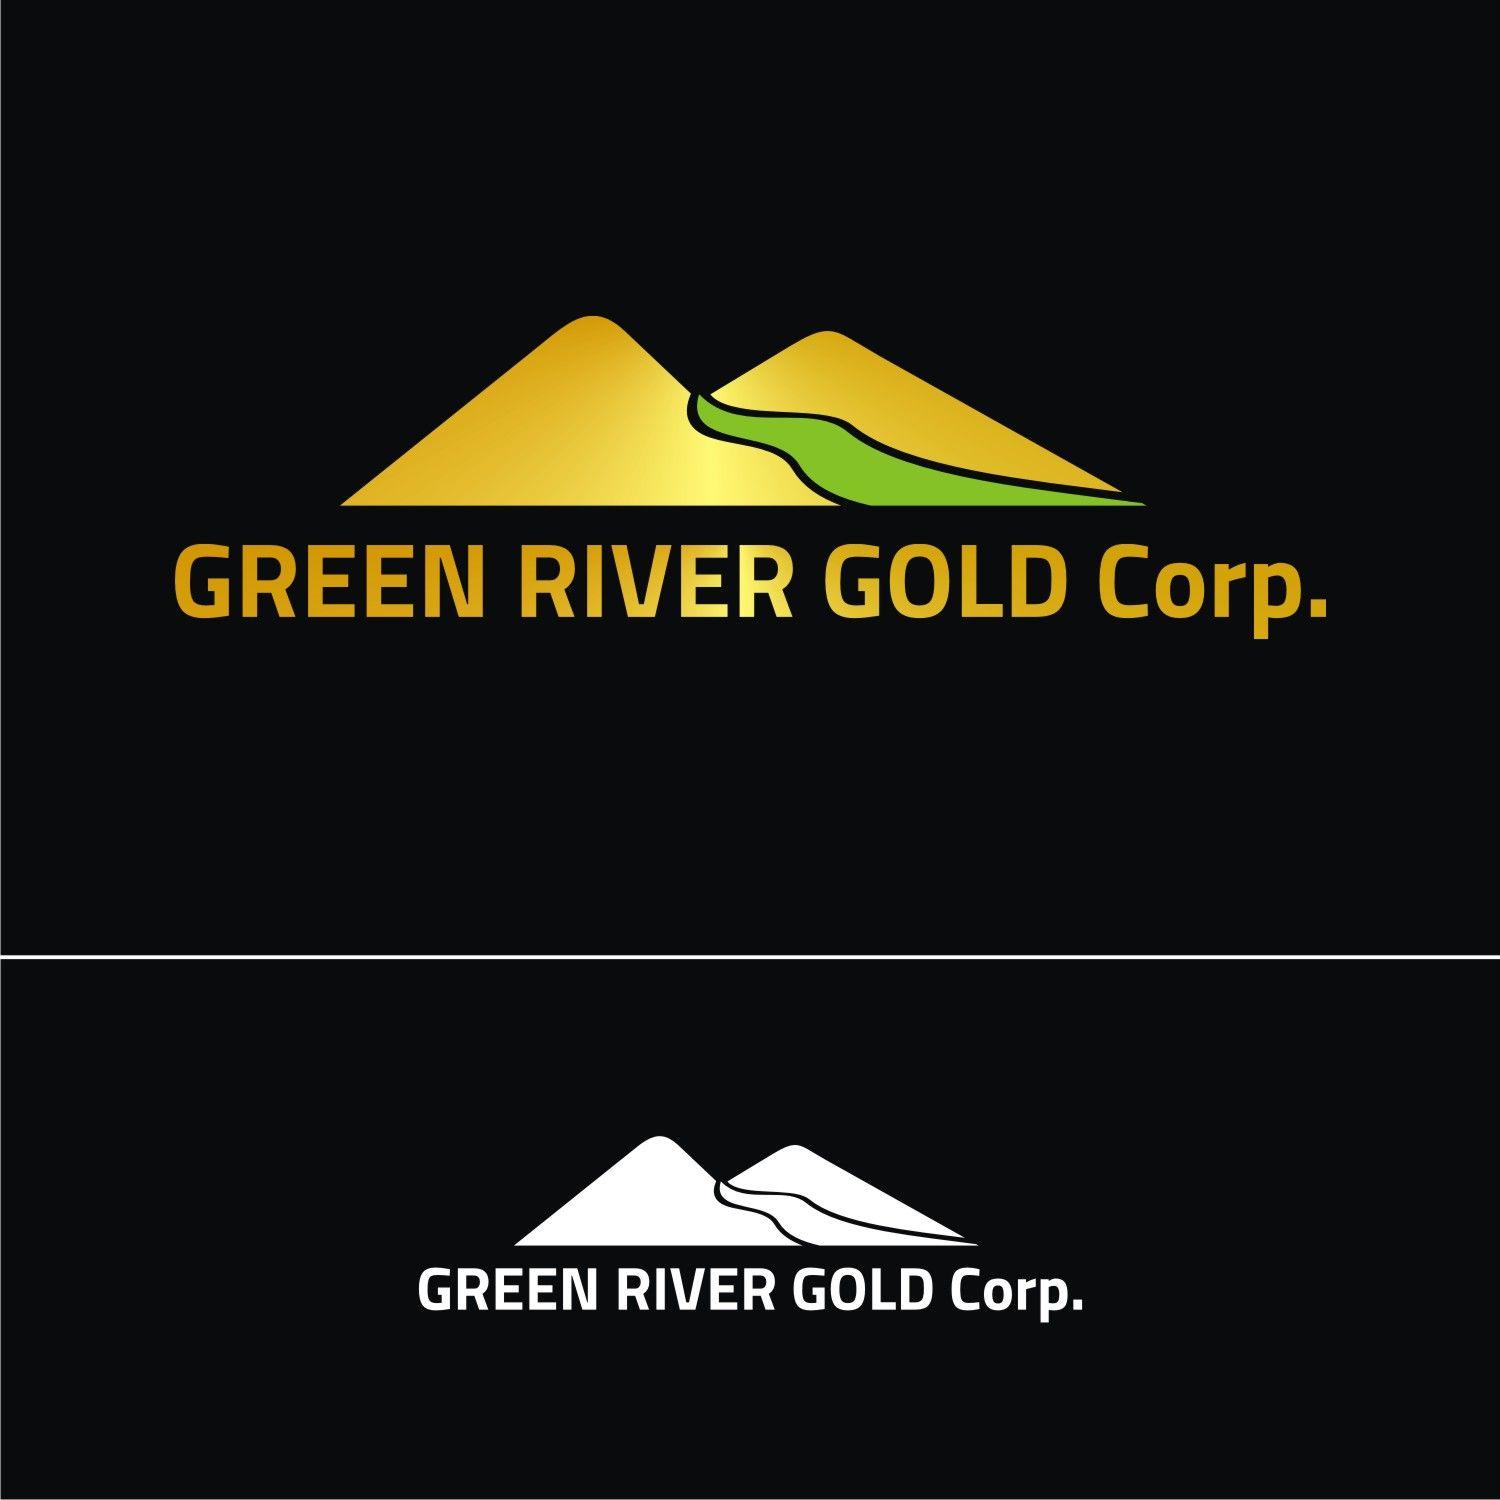 Companies with Triangle Green Logo - Professional, Bold, It Company Logo Design for Green River Gold Corp ...